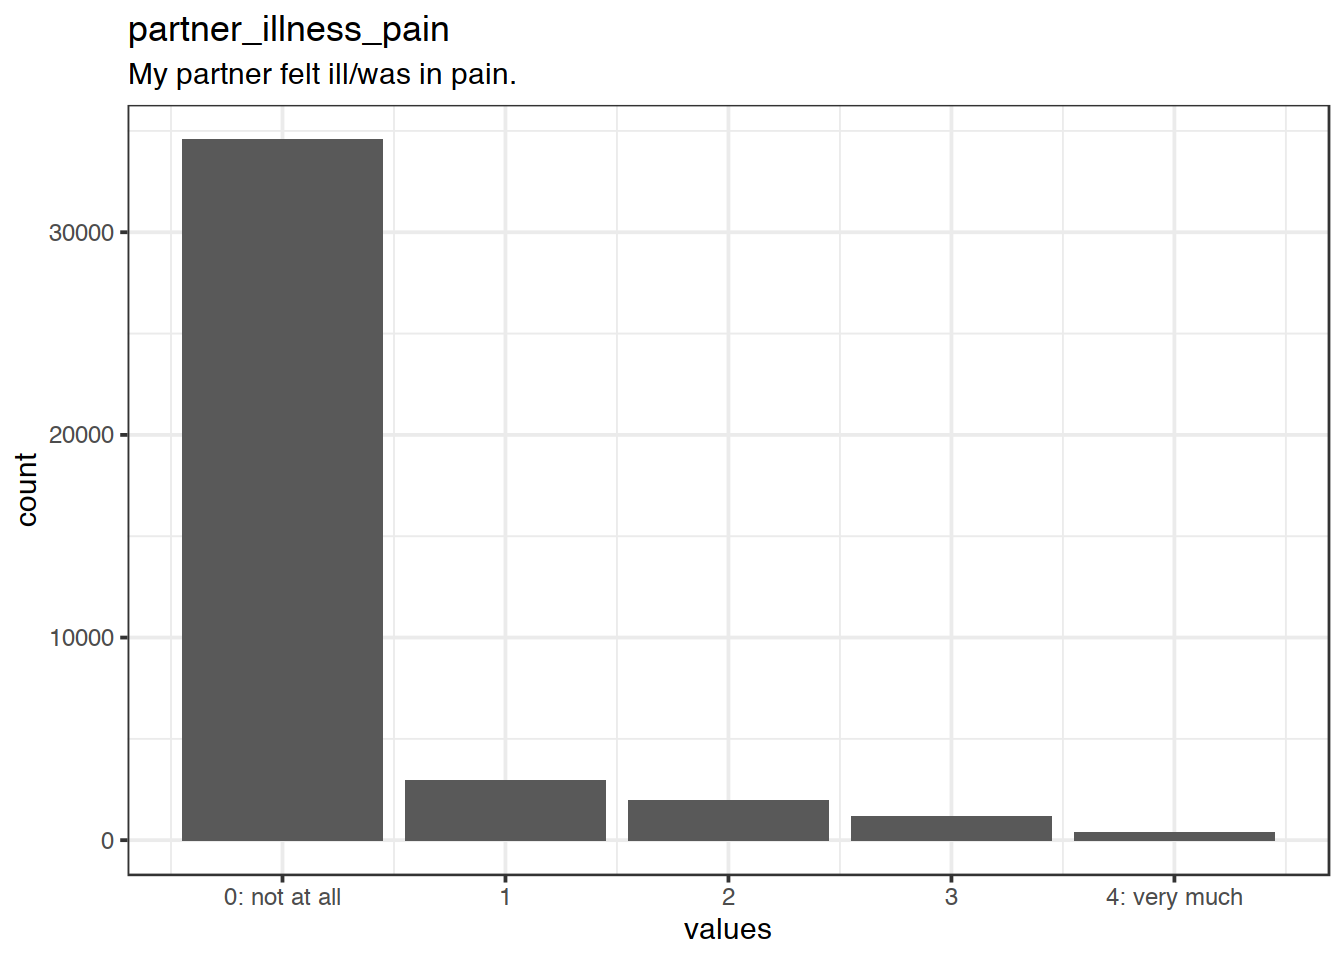 Distribution of values for partner_illness_pain